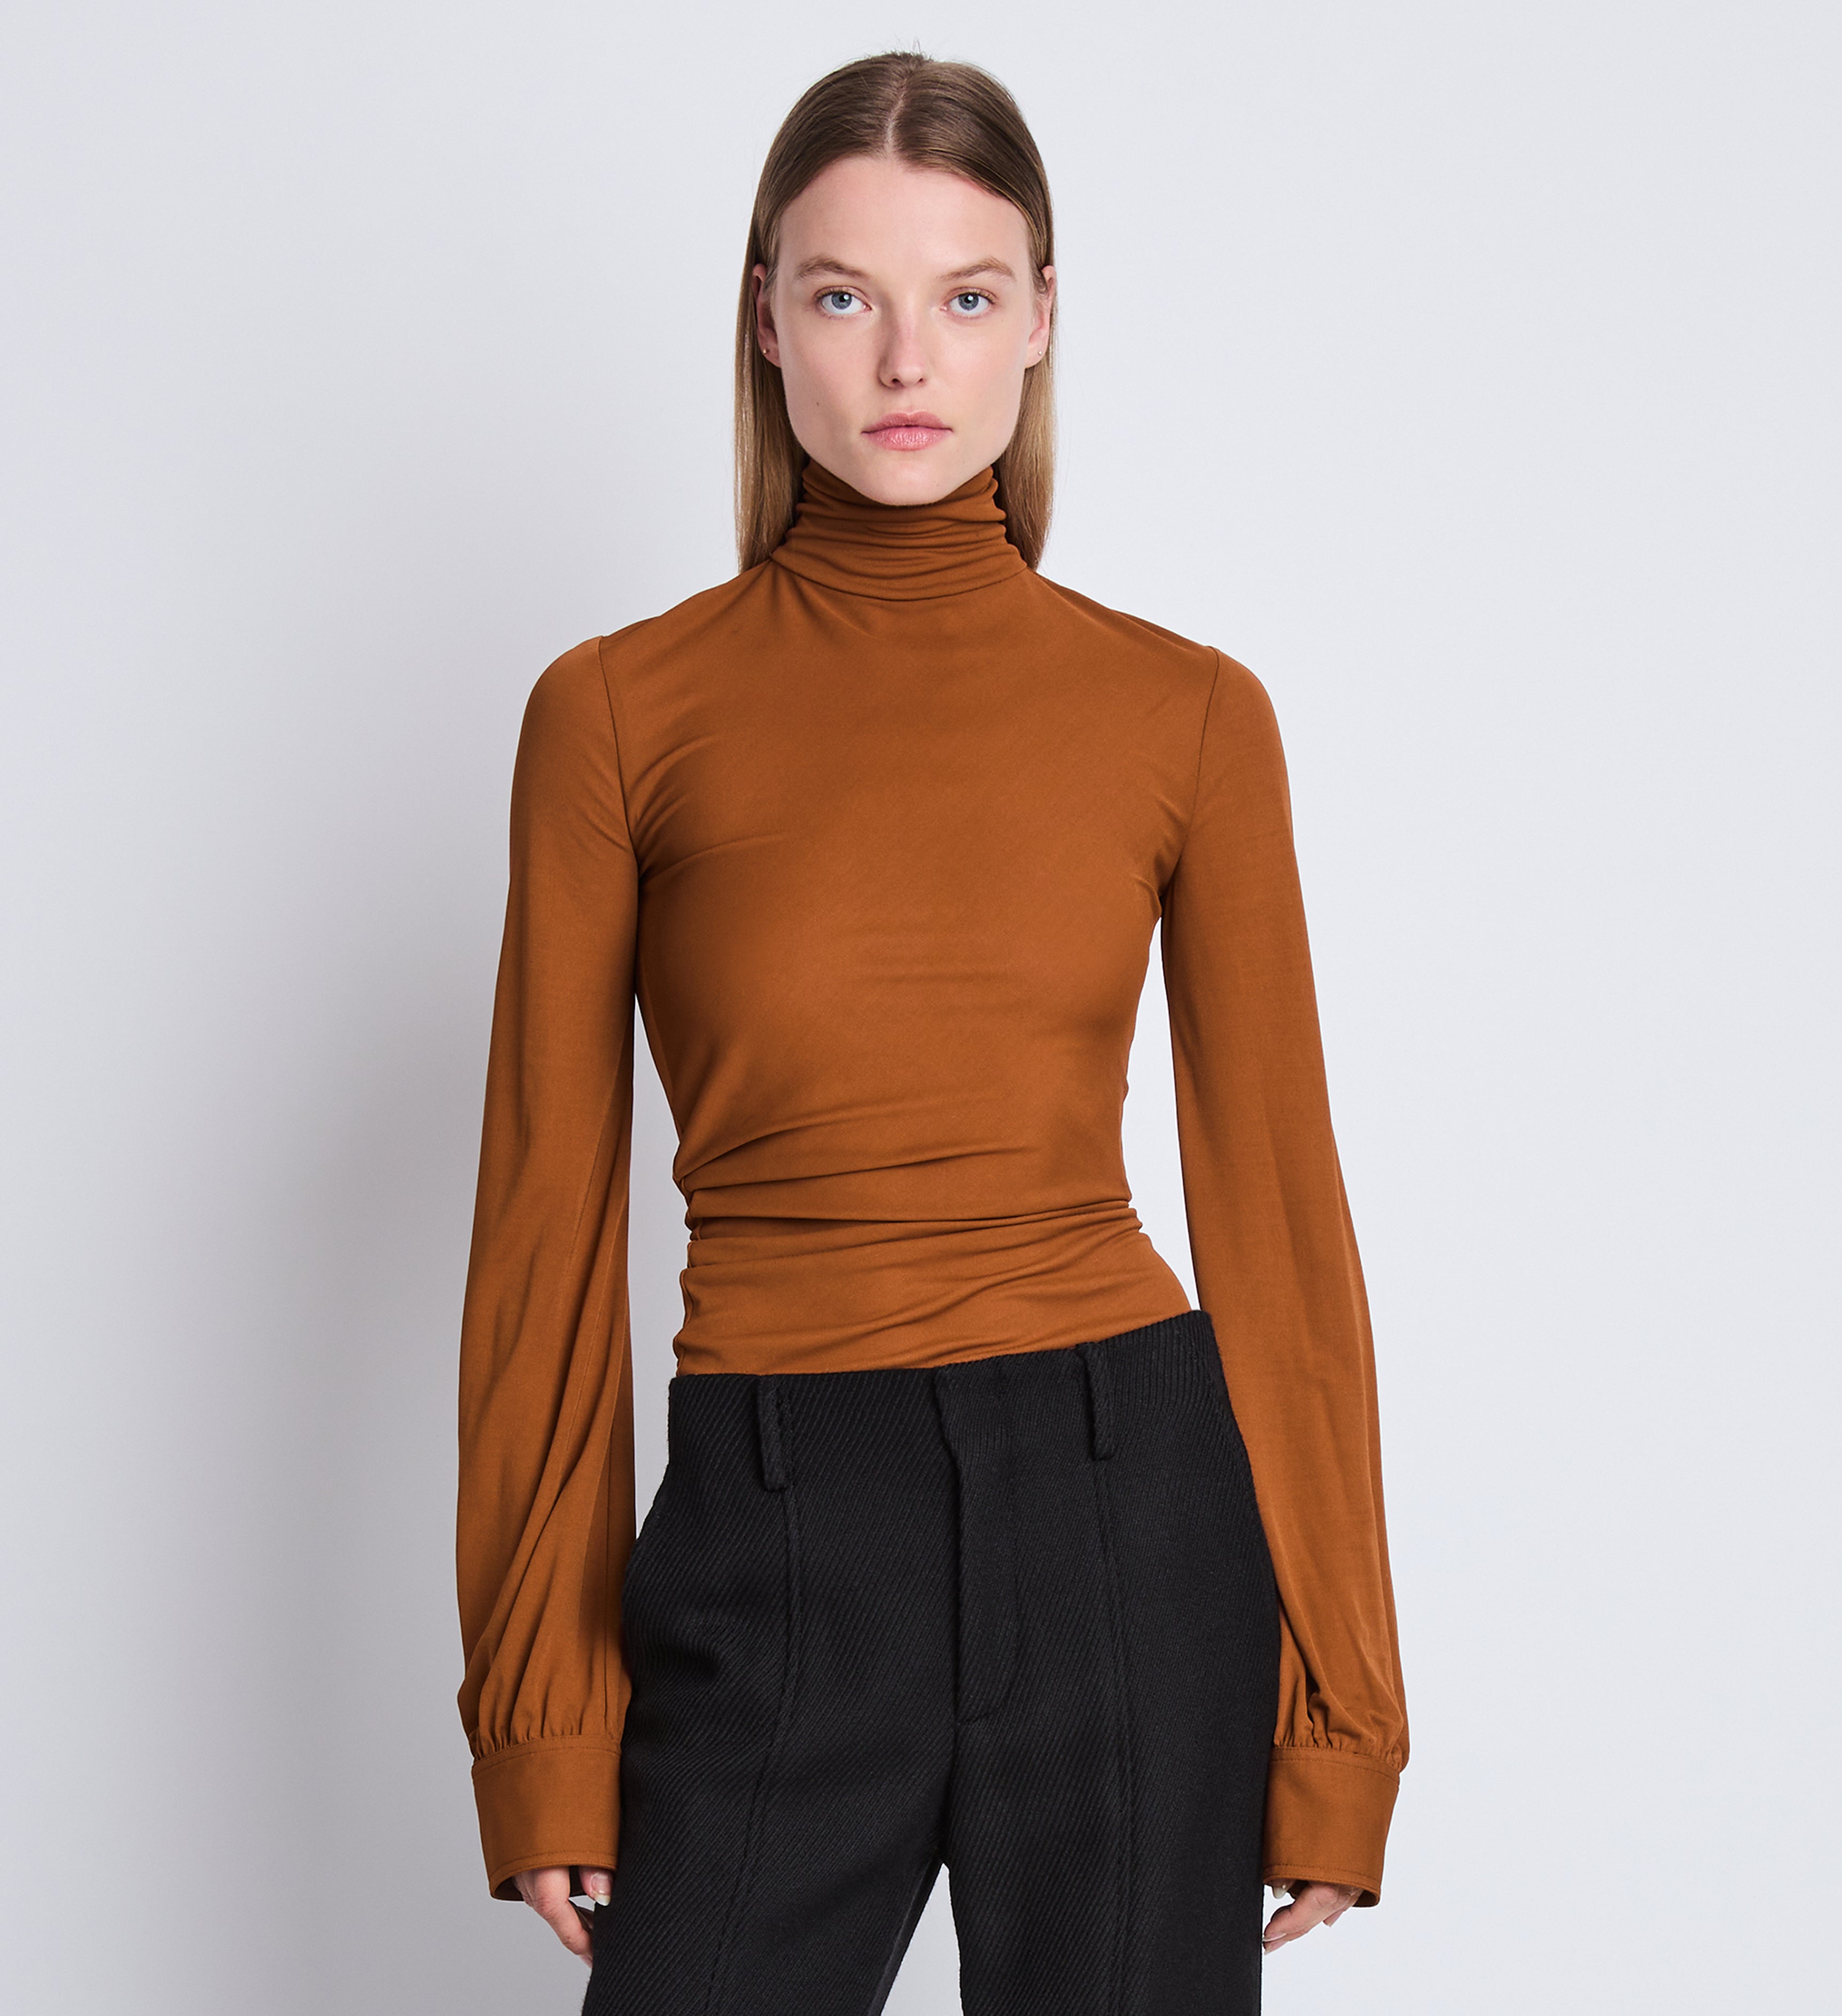 Shop Tops, Shirts, and Tank Tops | Proenza Schouler - Official Site